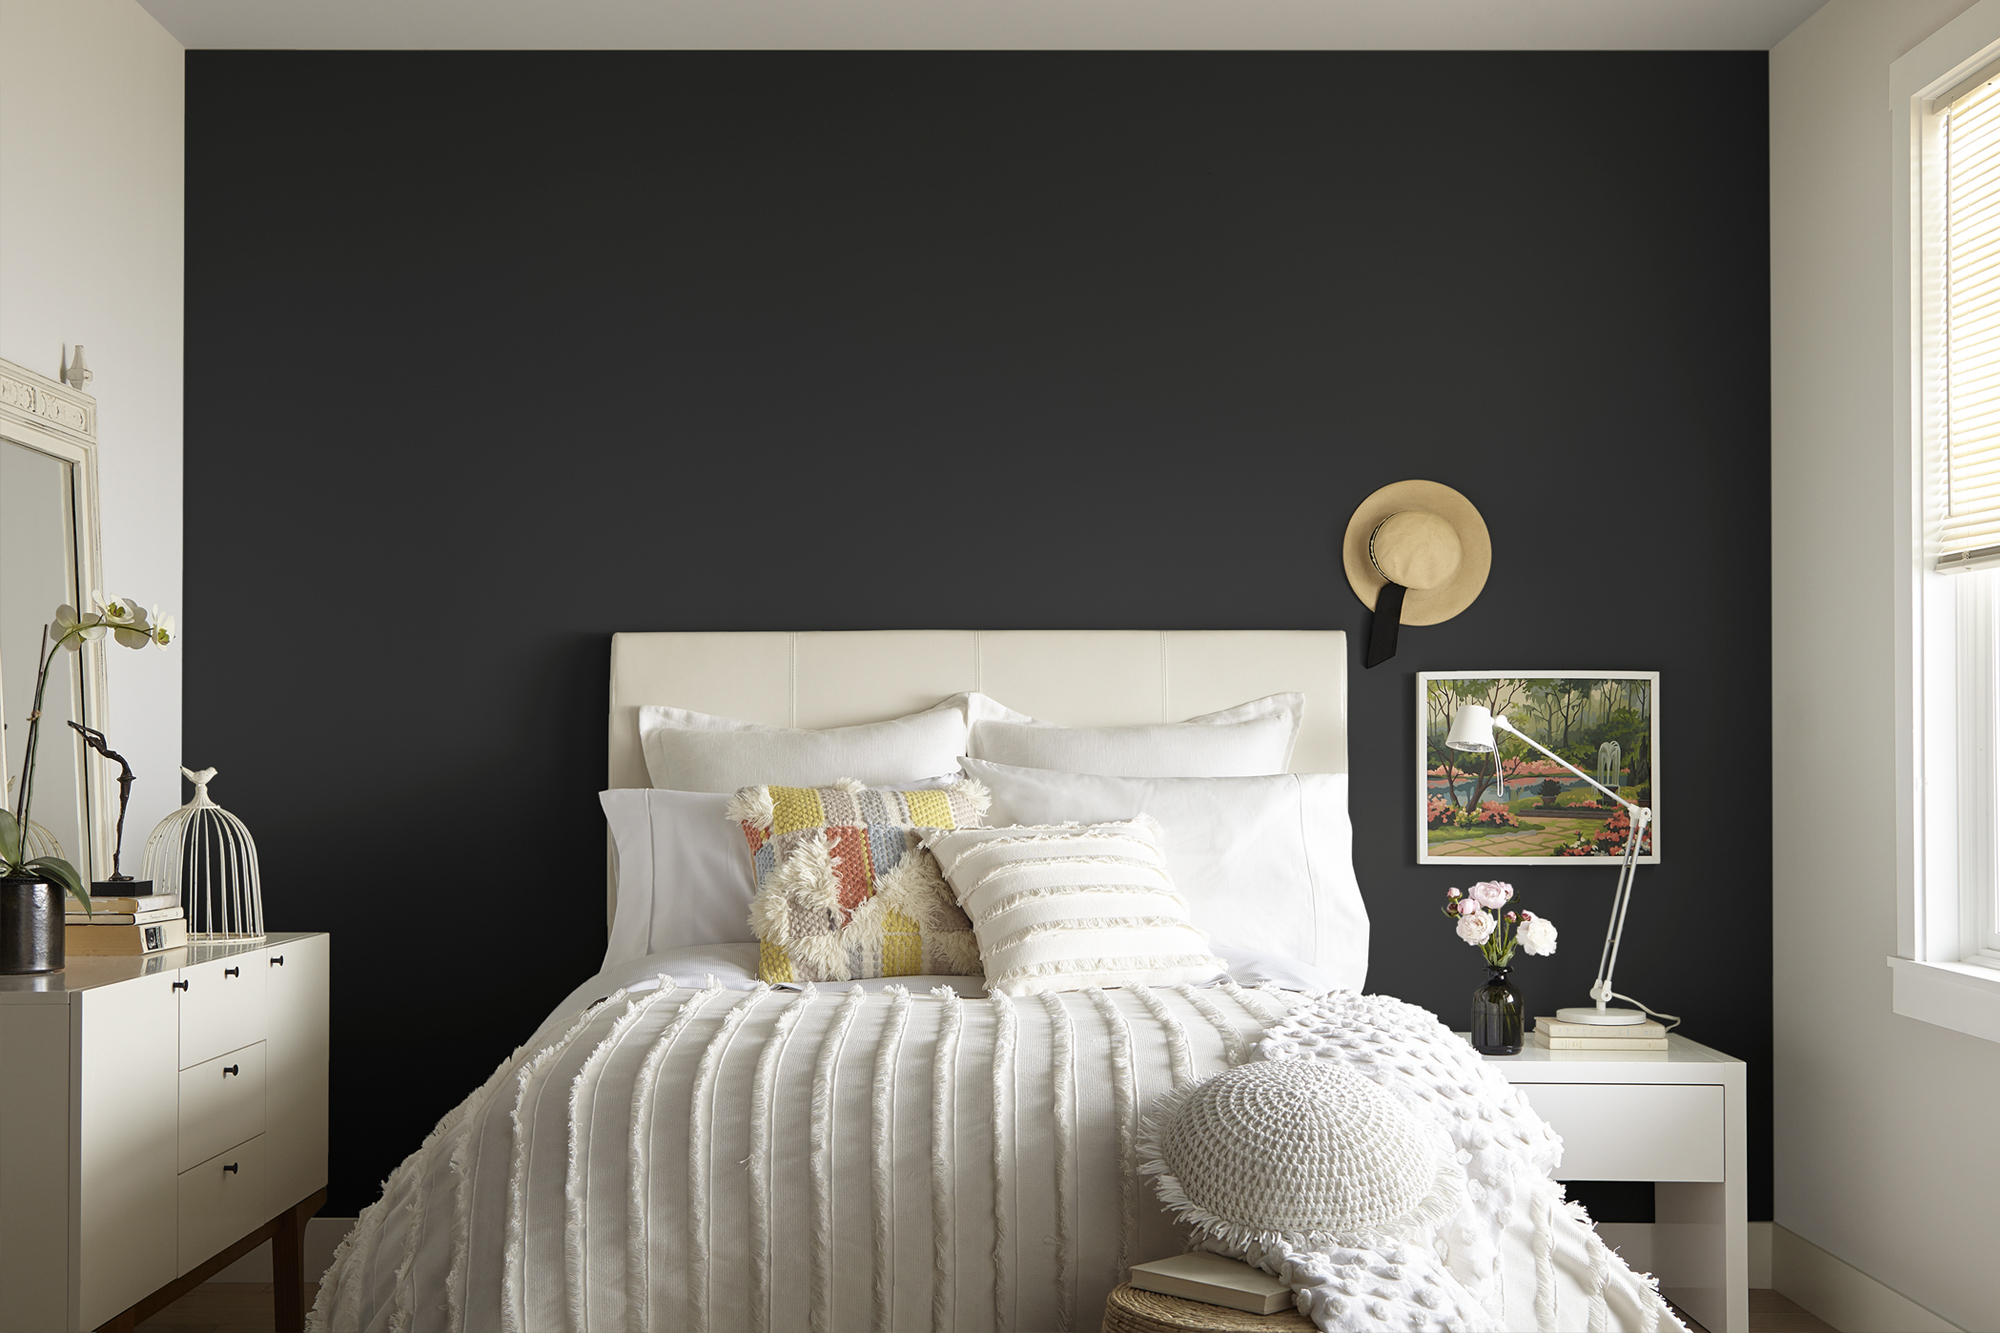 How To Paint A Dark Accent Wall The Perfect Finish Blog By